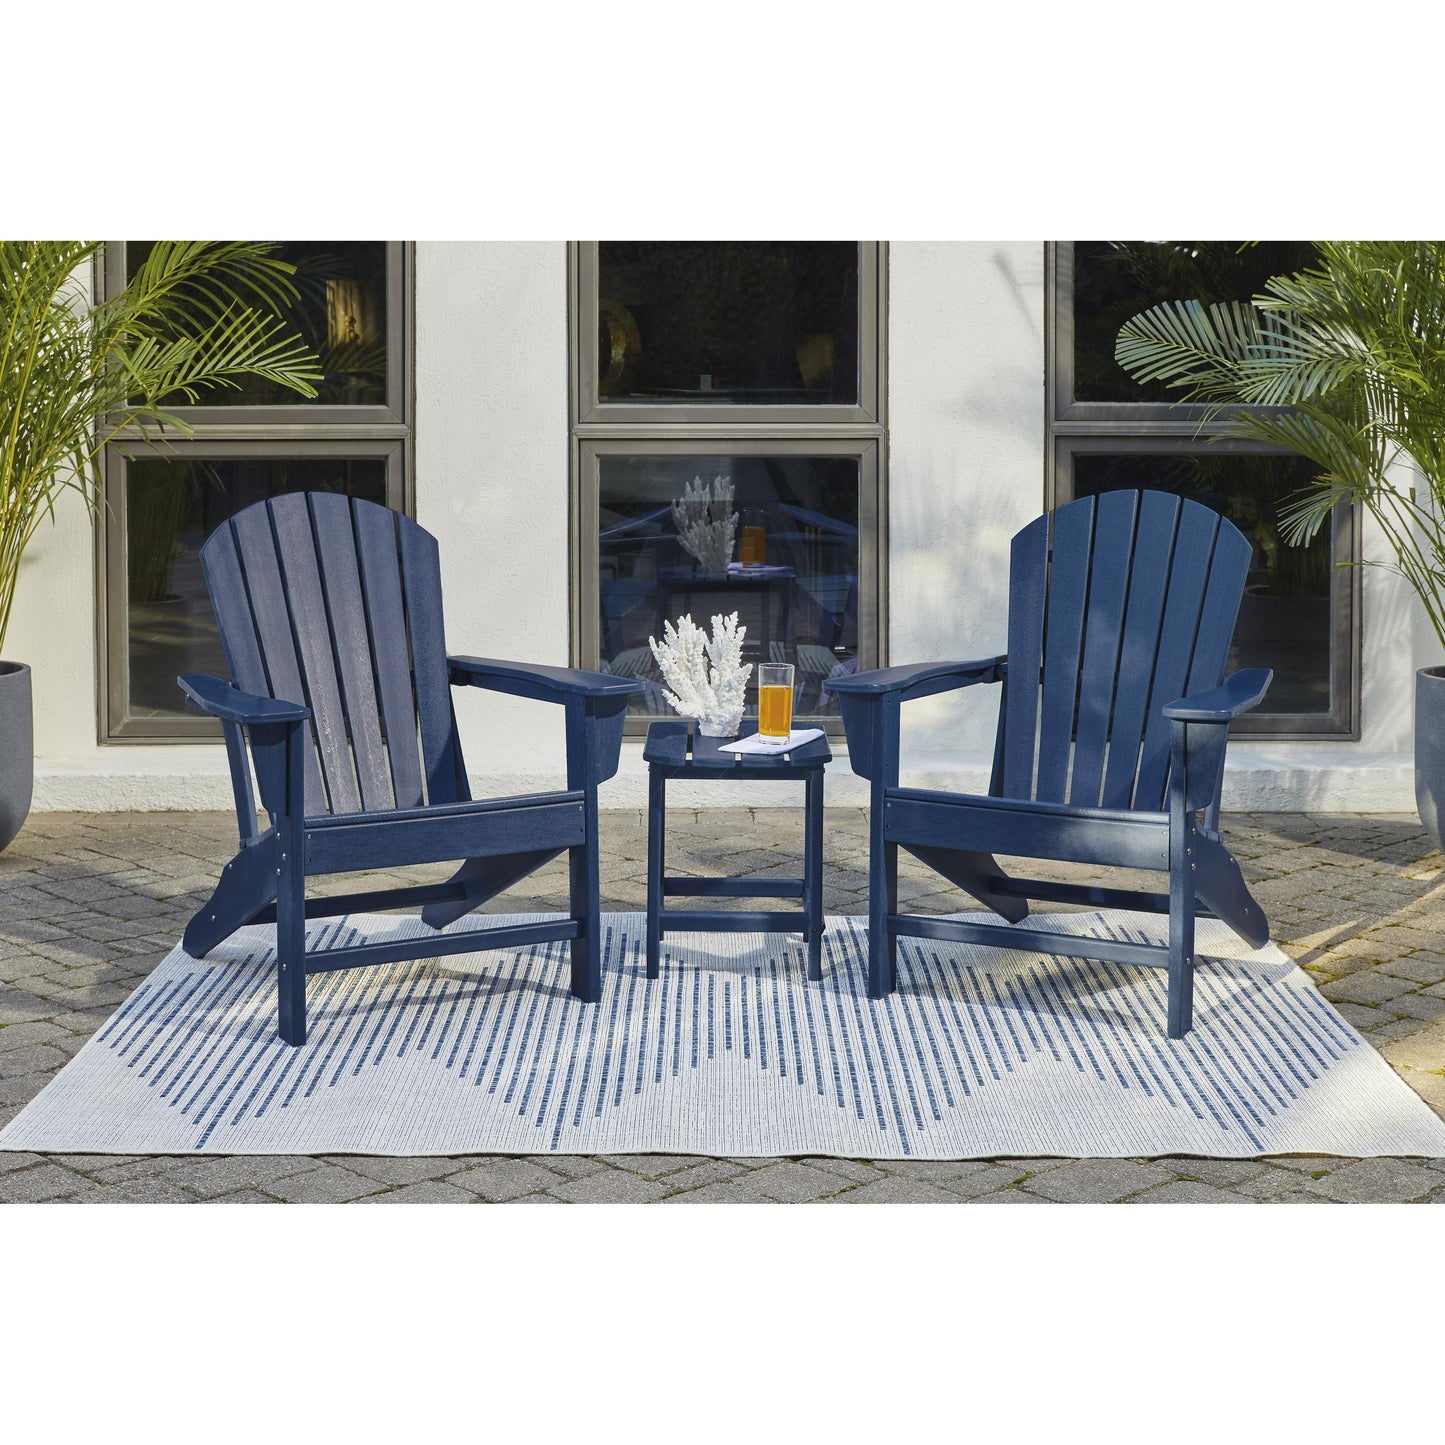 Signature Design by Ashley Outdoor Seating Adirondack Chairs P009-898 IMAGE 7